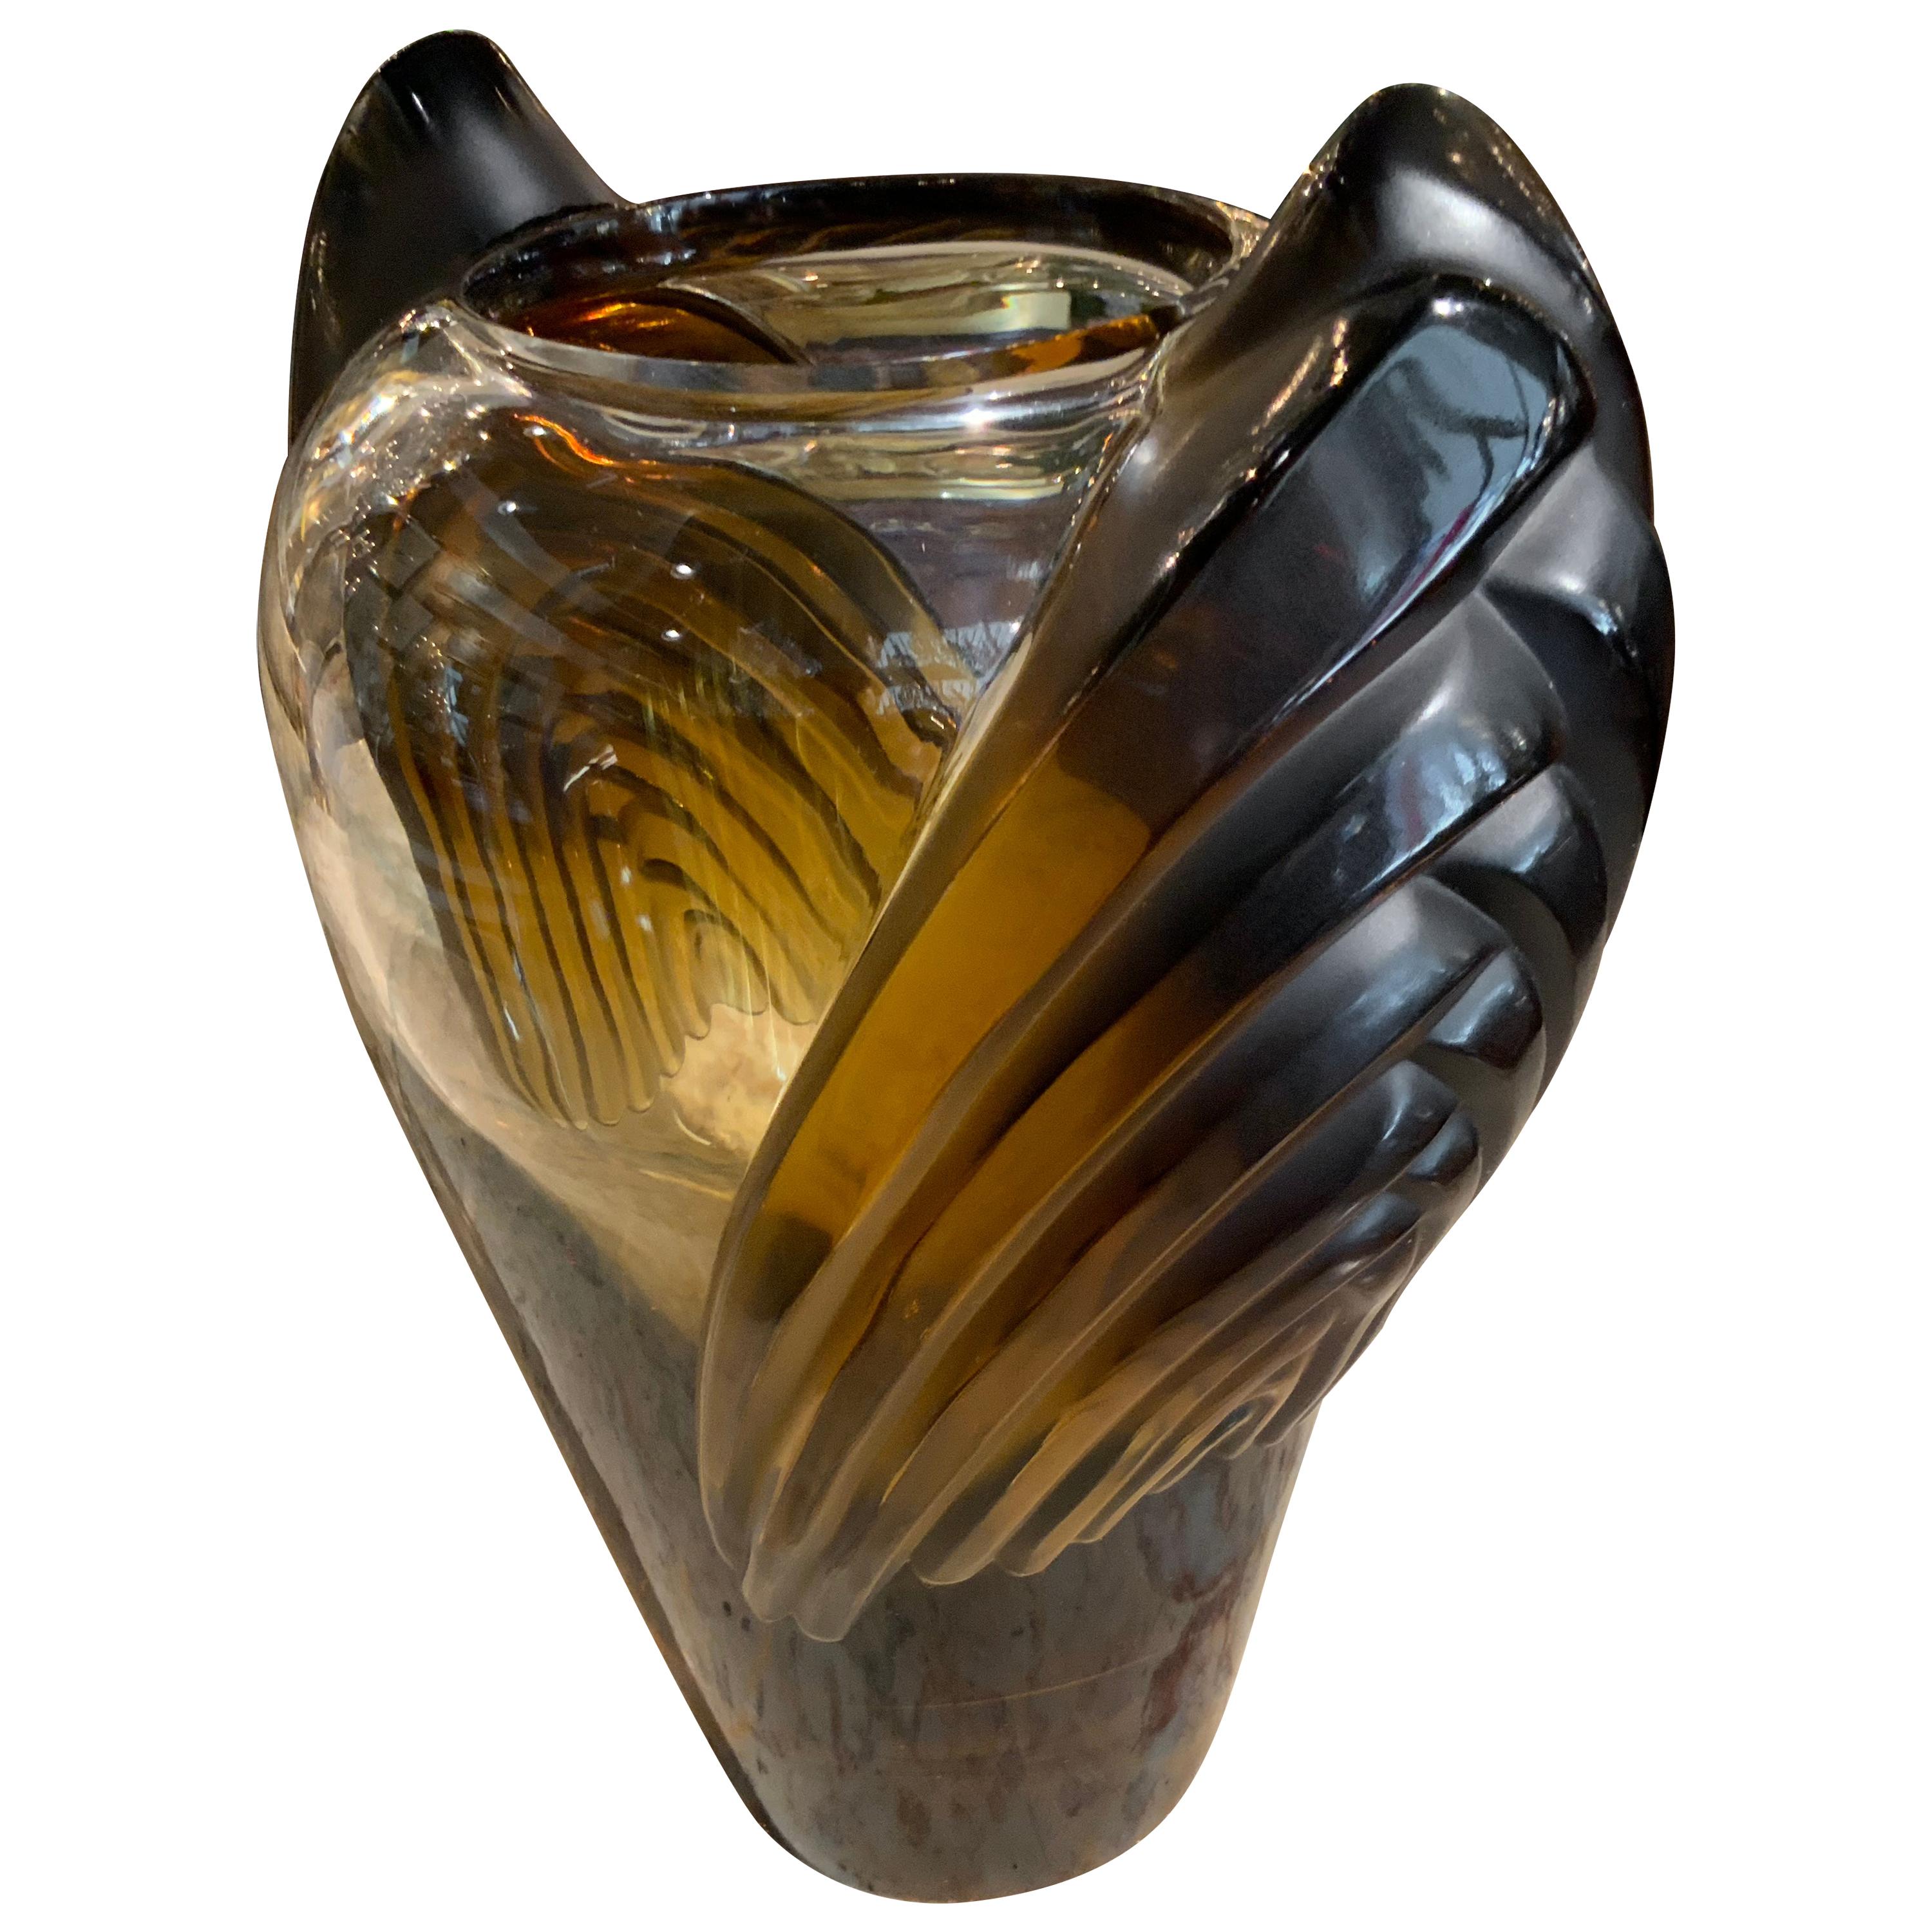 Lalique Vase “Marrakesh” in Smoked Amber Glass, Art Deco Style